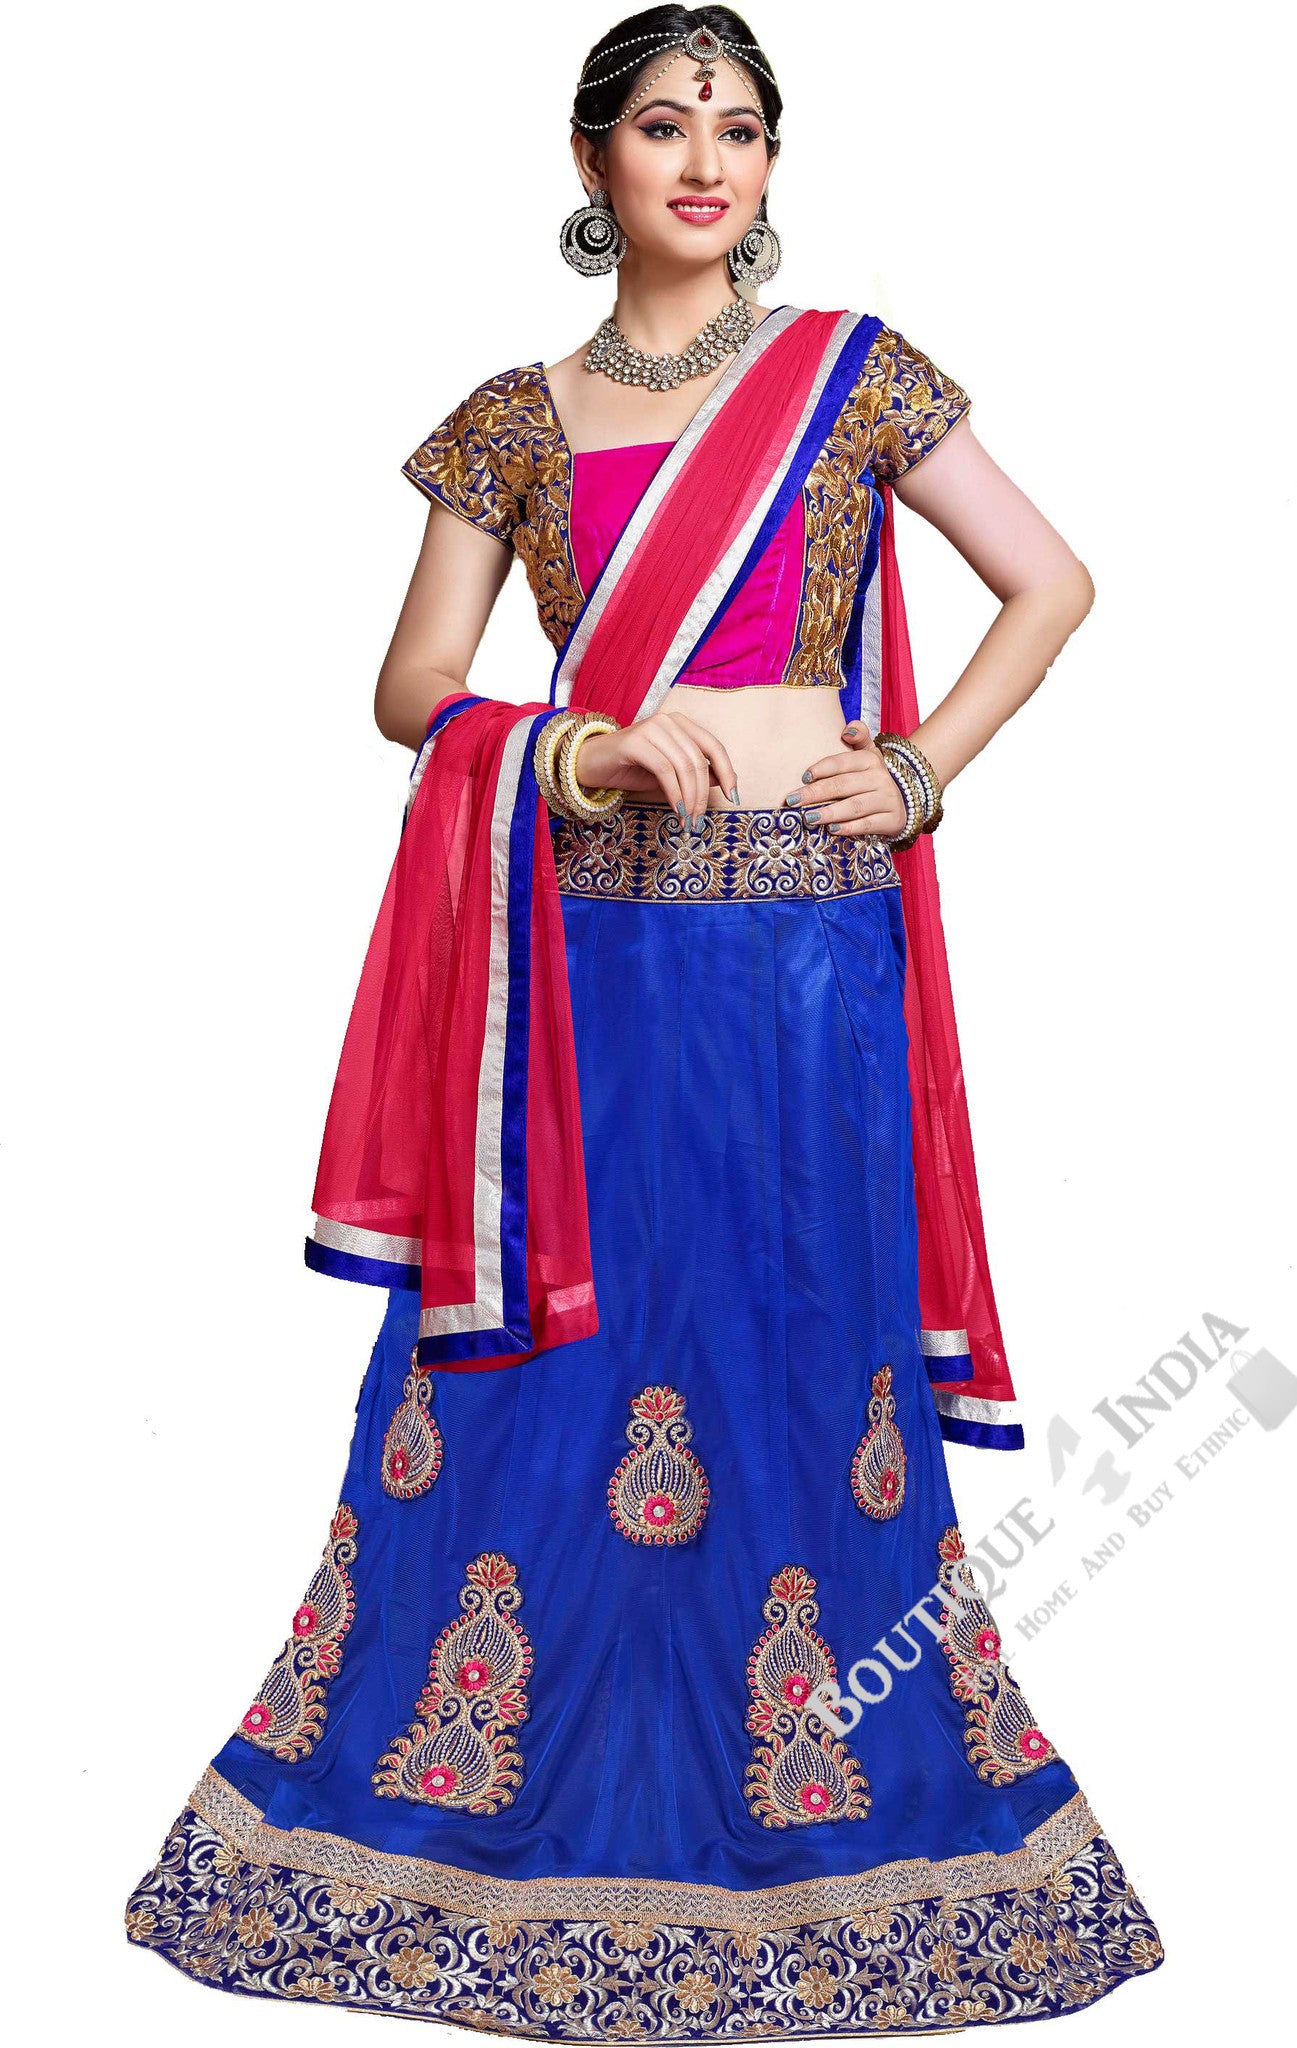 Lehenga - Attractive Heavy Work Designer Lehenga Collection - Rich Blue And Hot Pink Most Beautiful 3 Piece Semi Stitched Lehenga Collection For Party / Wedding / Special Occasions - Semi Stitched, Blouse - Ready to Stitch - Boutique4India Inc.